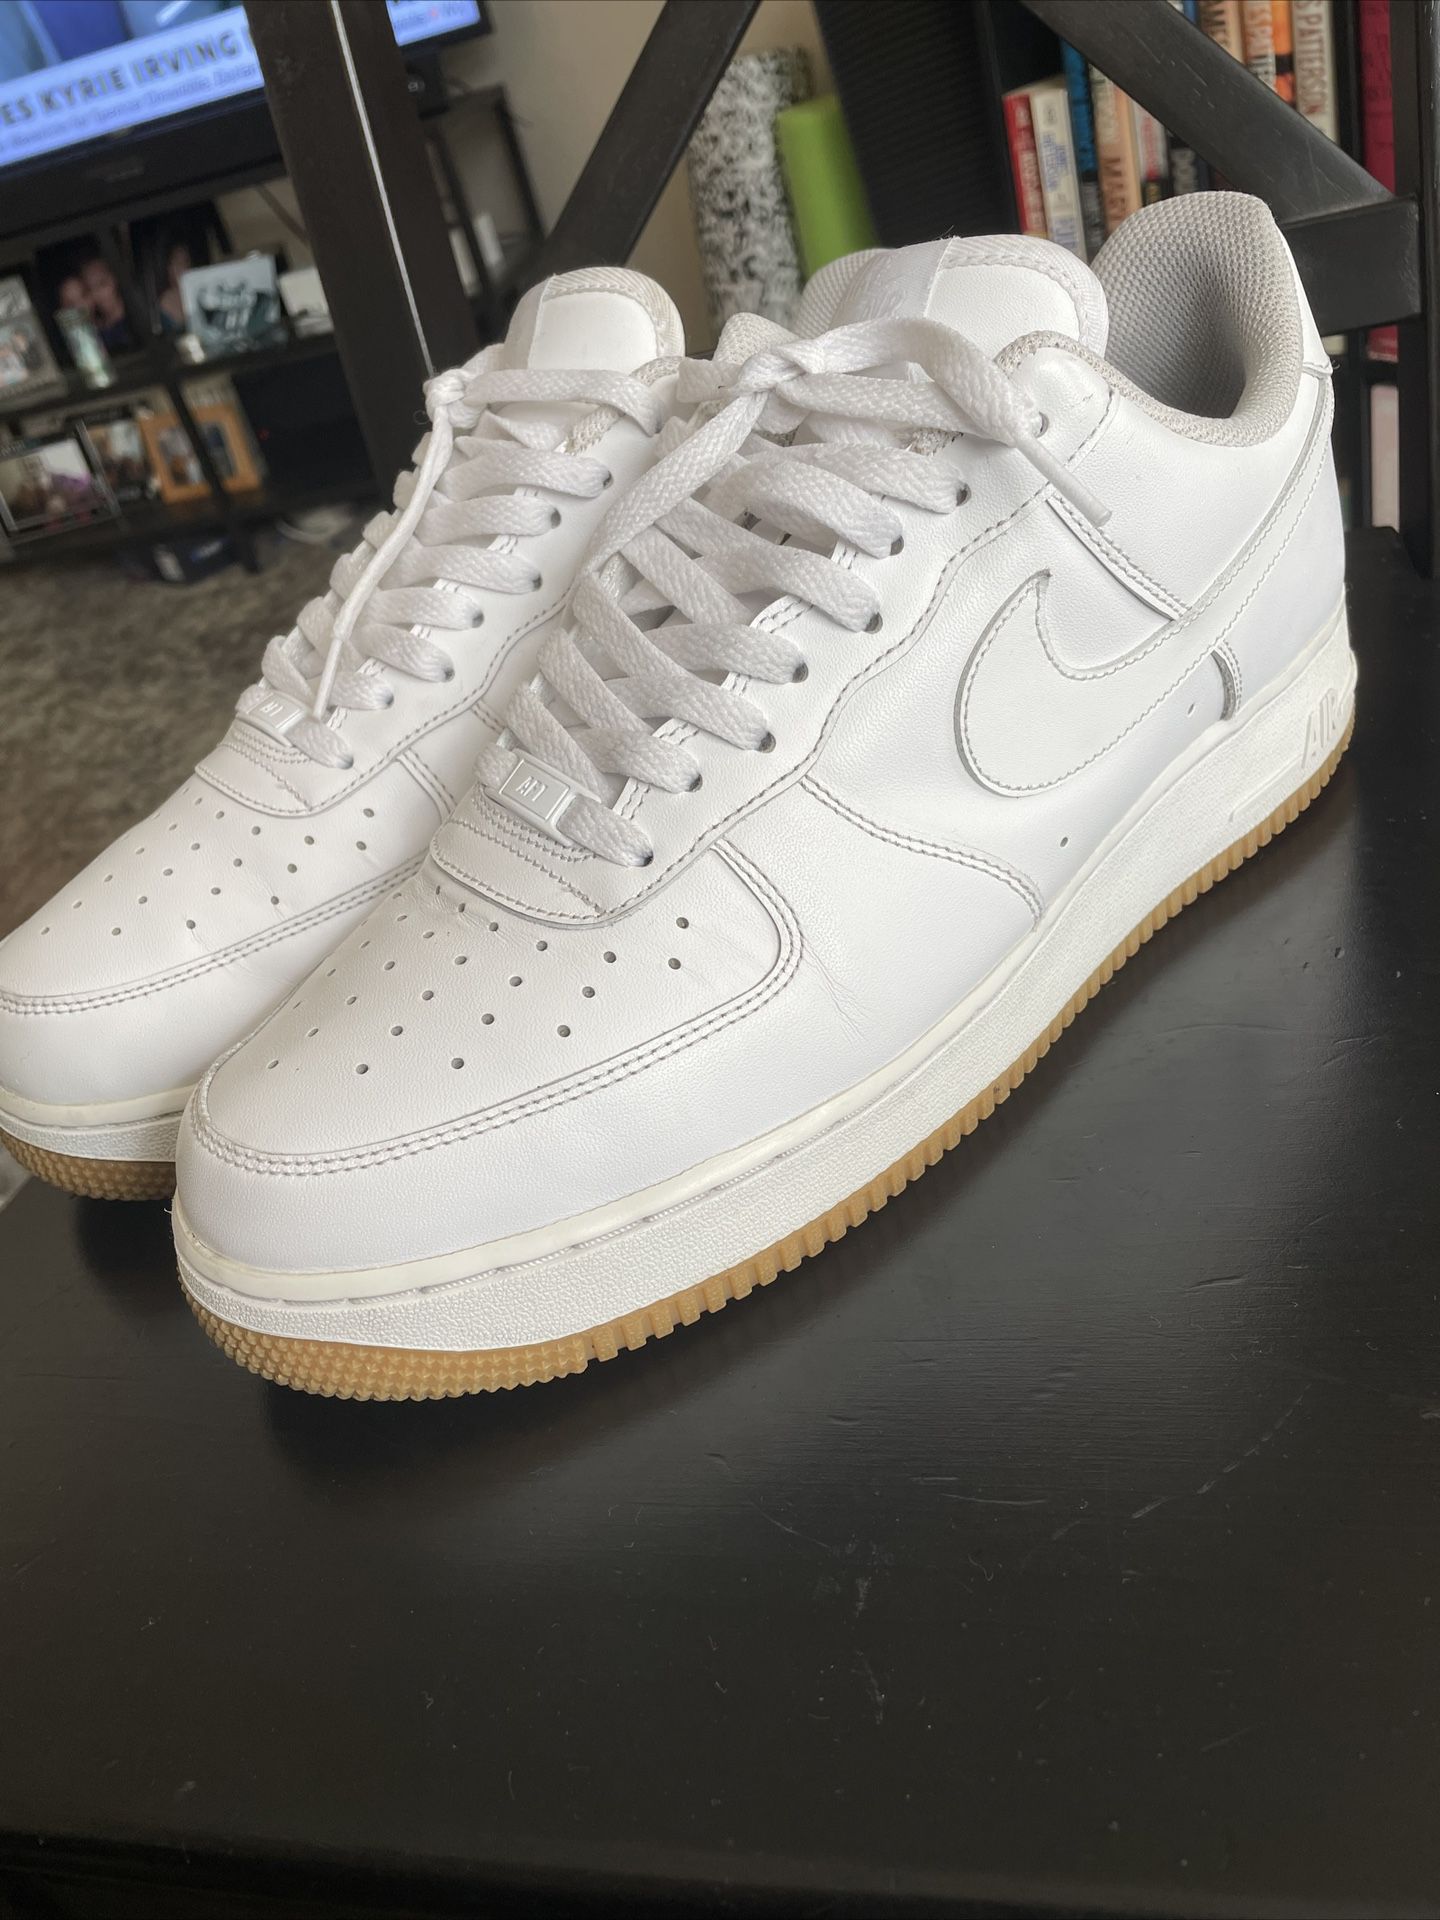 Nike Air Force 1 LV8 High GS Black Speckle Gold GUM Hightops Sneakers WMNS  6 for Sale in Mentone, CA - OfferUp